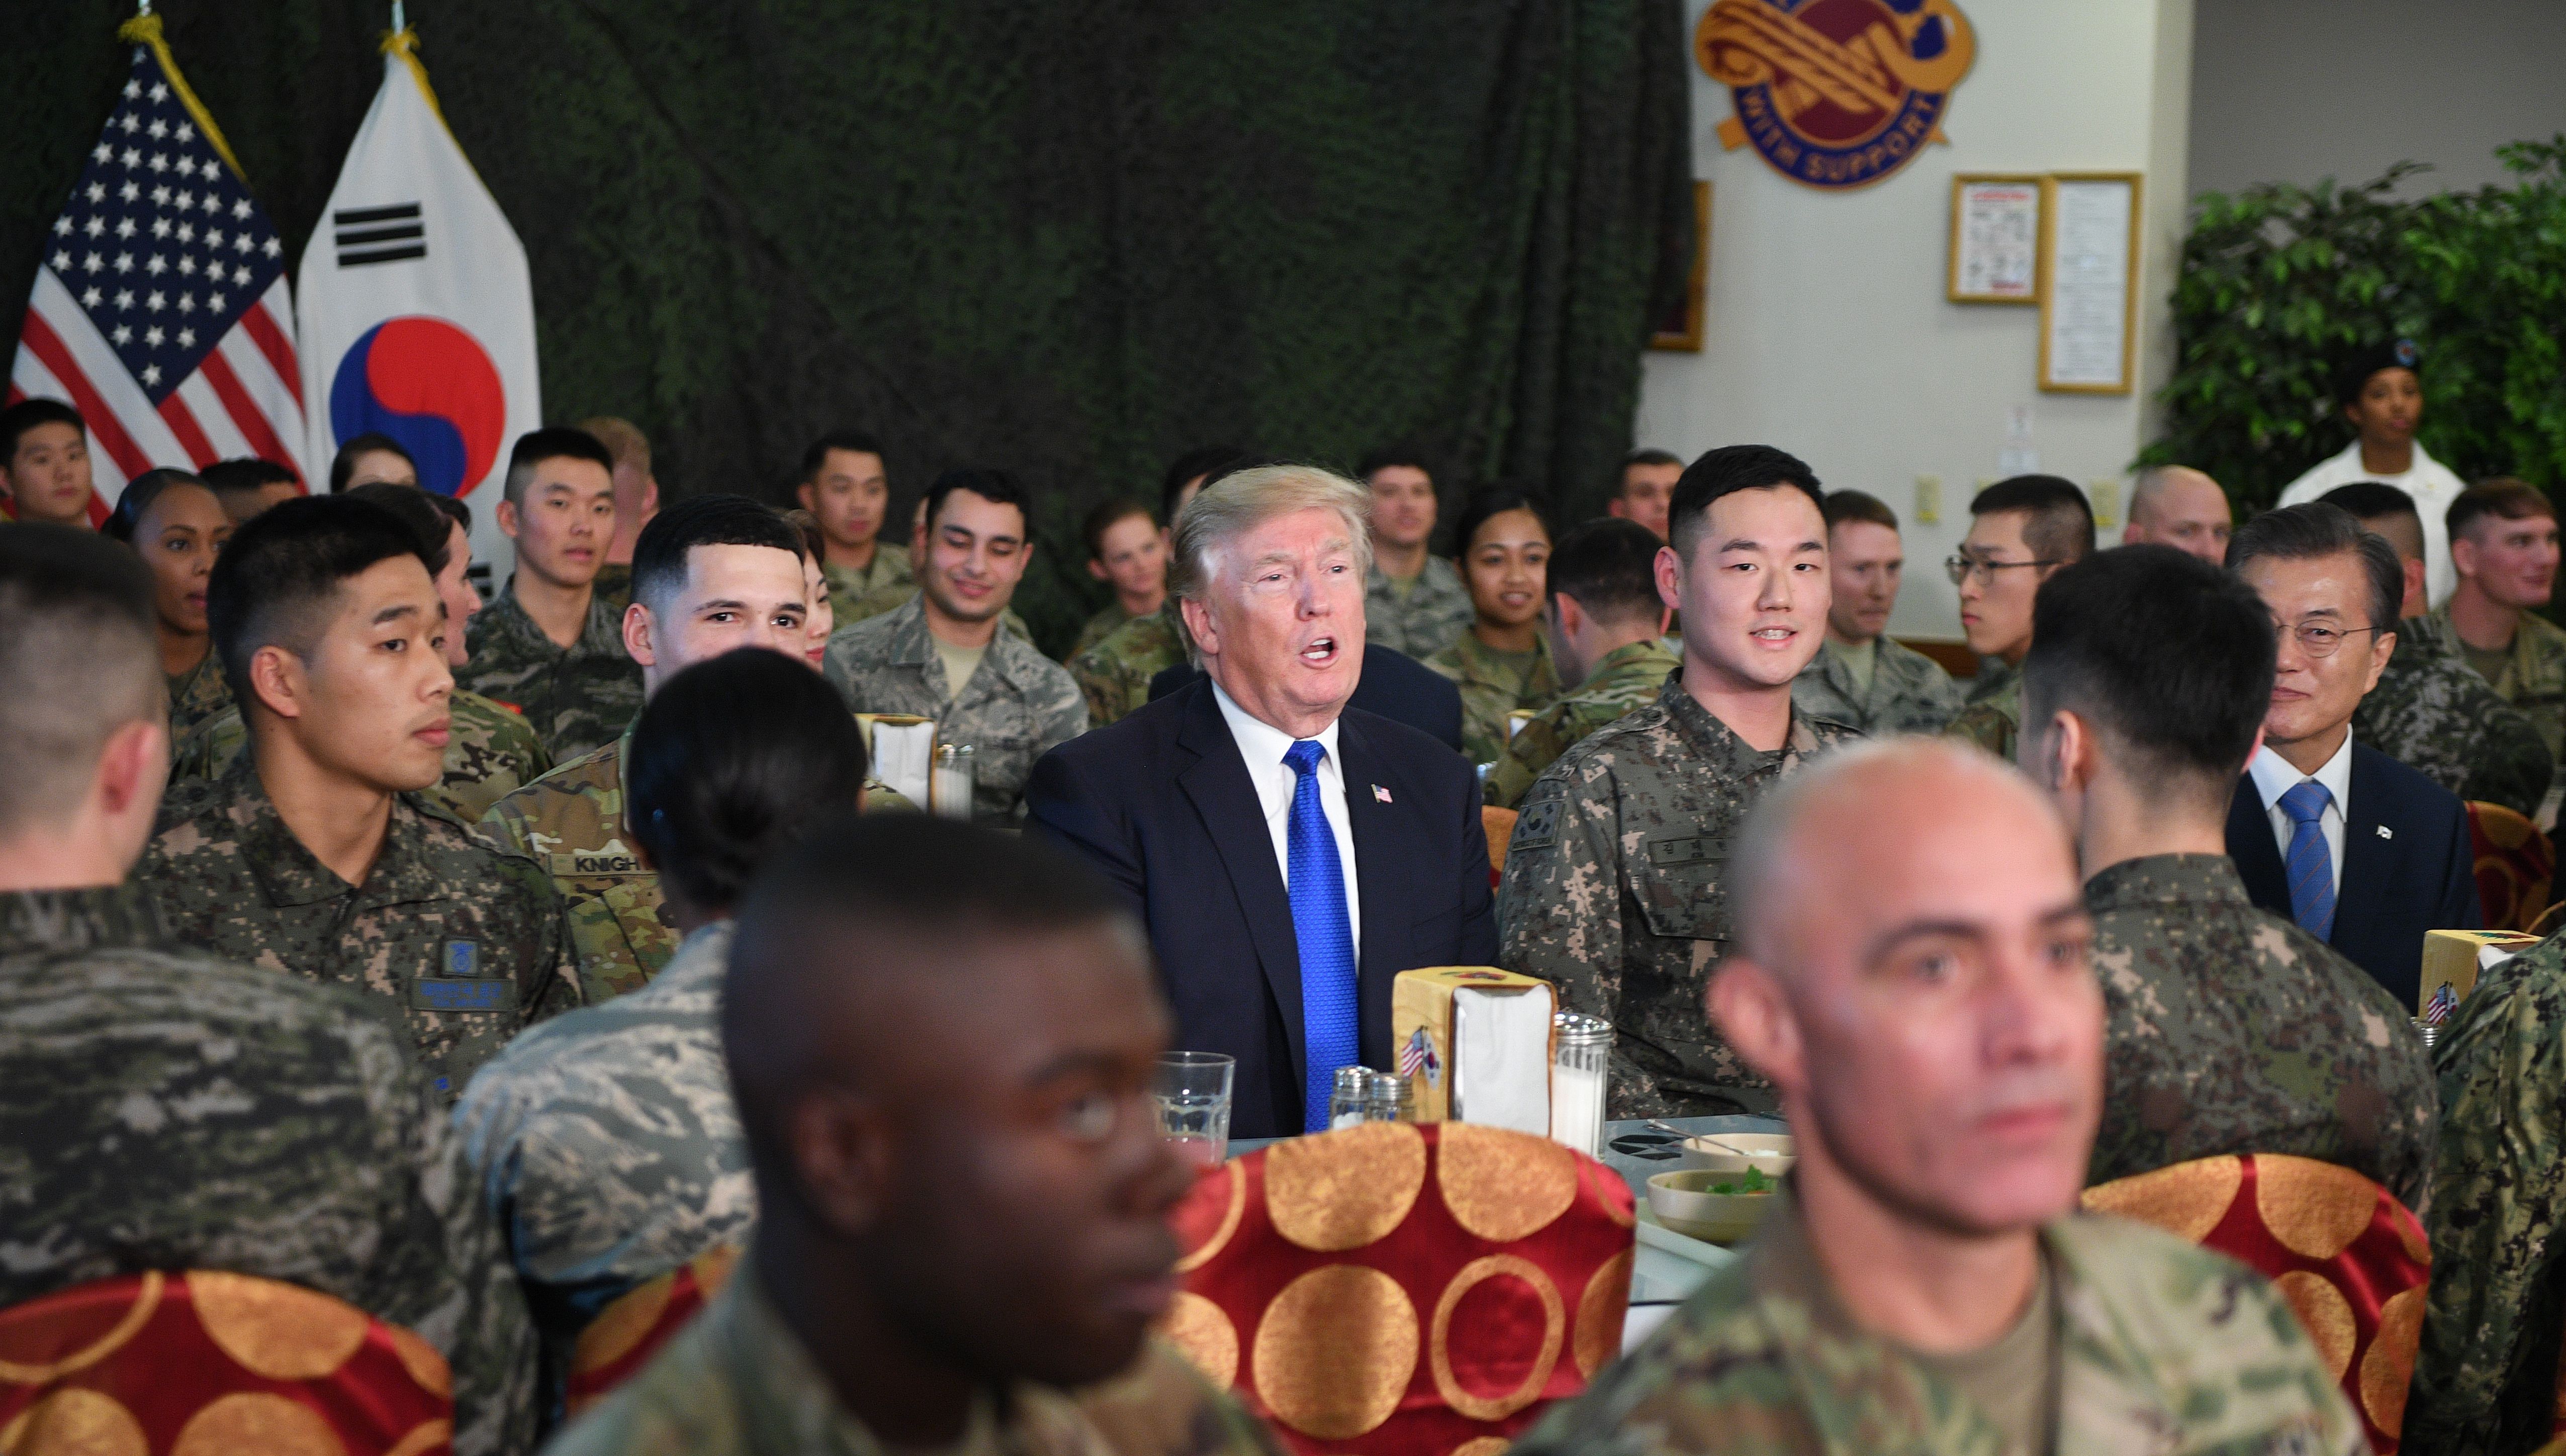 US President Donald Trump (C) talks to military personnel while South Korean President Moon Jae-In (R) looks on at Camp Humphreys in Pyeongtaek, south of Seoul on November 7, 2017. Trump's marathon Asia tour moves to South Korea, another key ally in the struggle with nuclear-armed North Korea, but one with deep reservations about the US president's strategy for dealing with the crisis. JIM WATSON/AFP/Getty Images